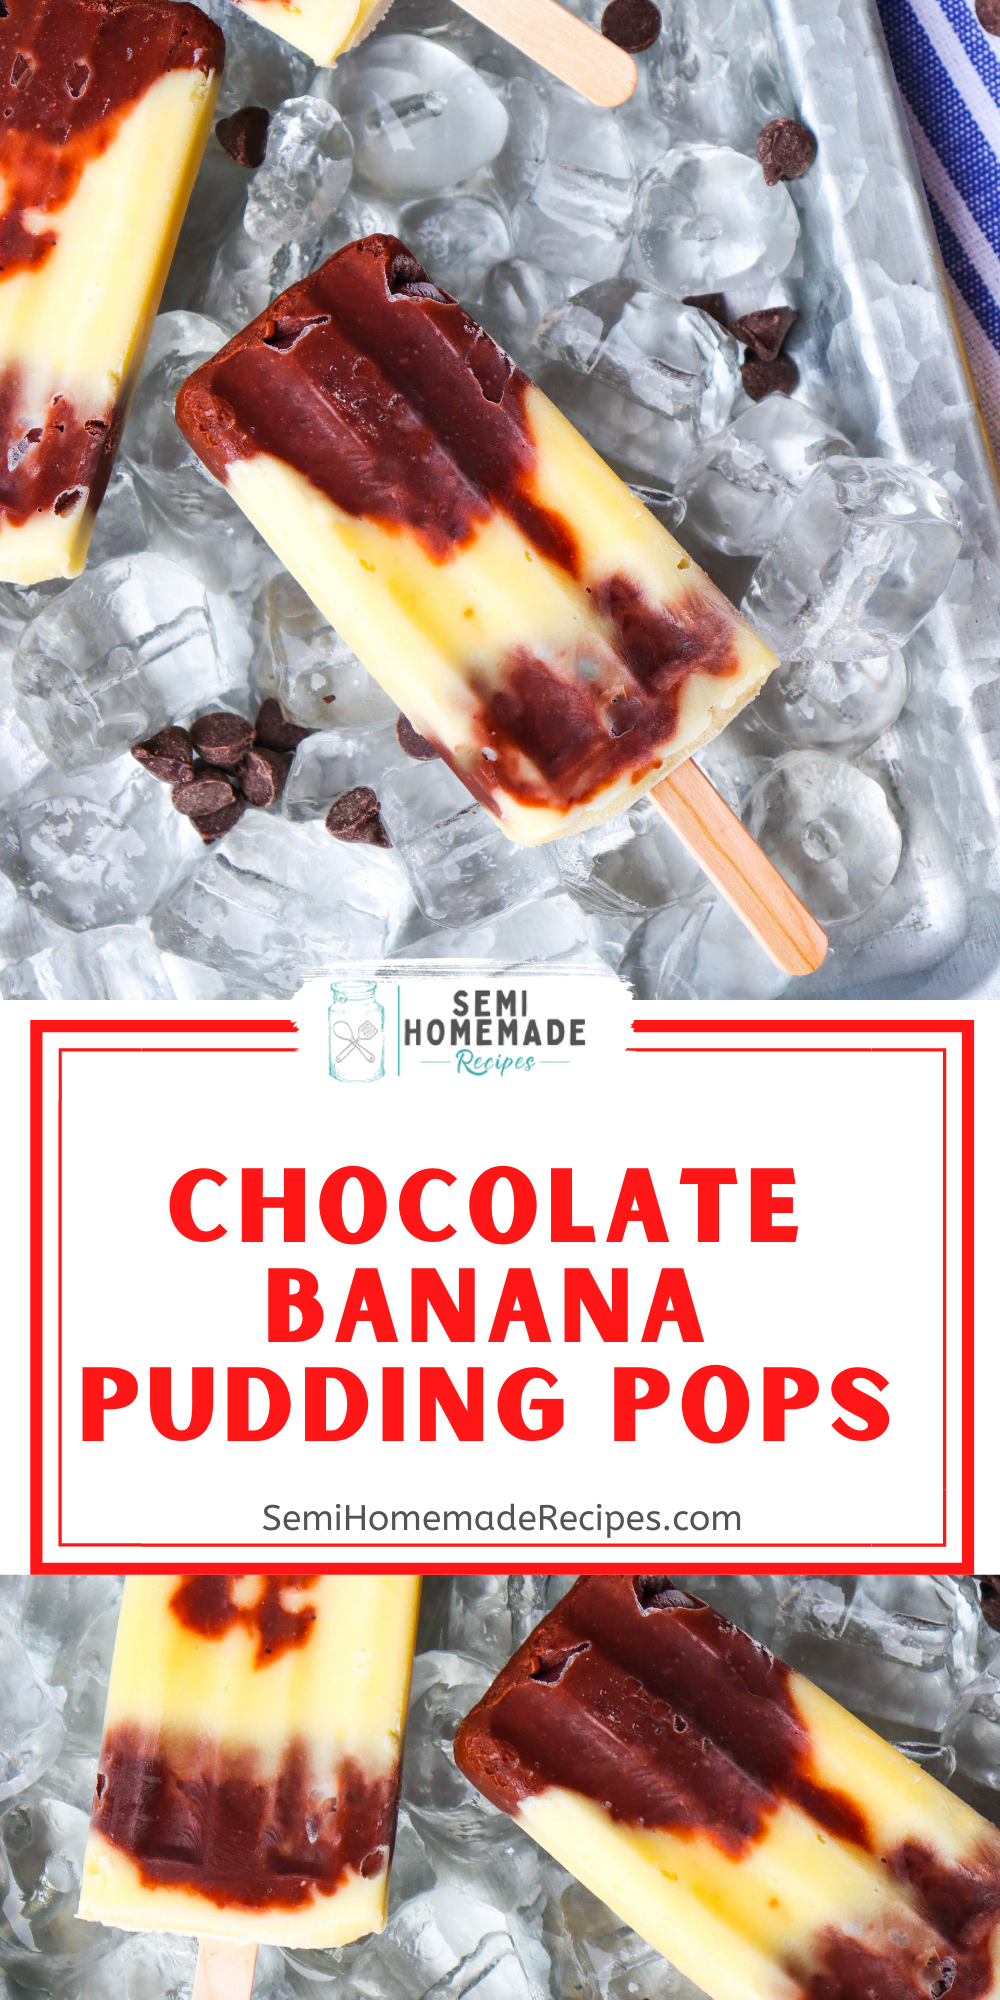 Layers of Chocolate pudding and layers of banana pudding make up these fun homemade frozen Chocolate Banana Pudding Pops! 